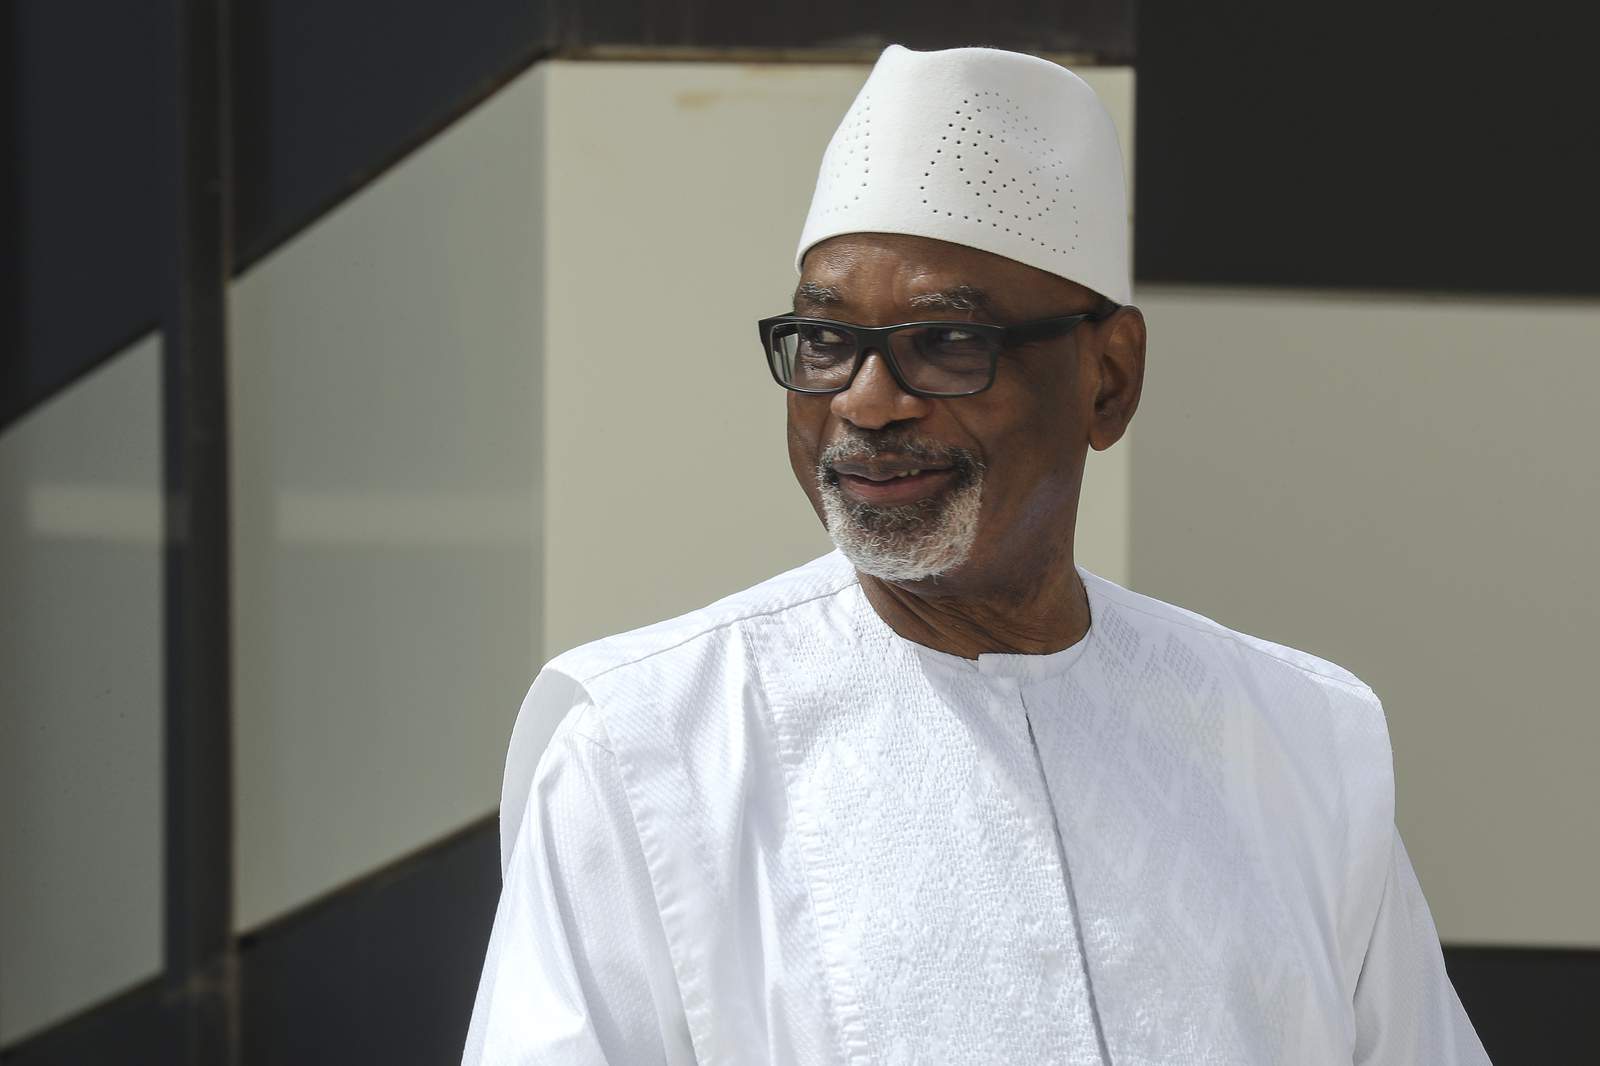 Deposed president evacuated from Mali for medical treatment